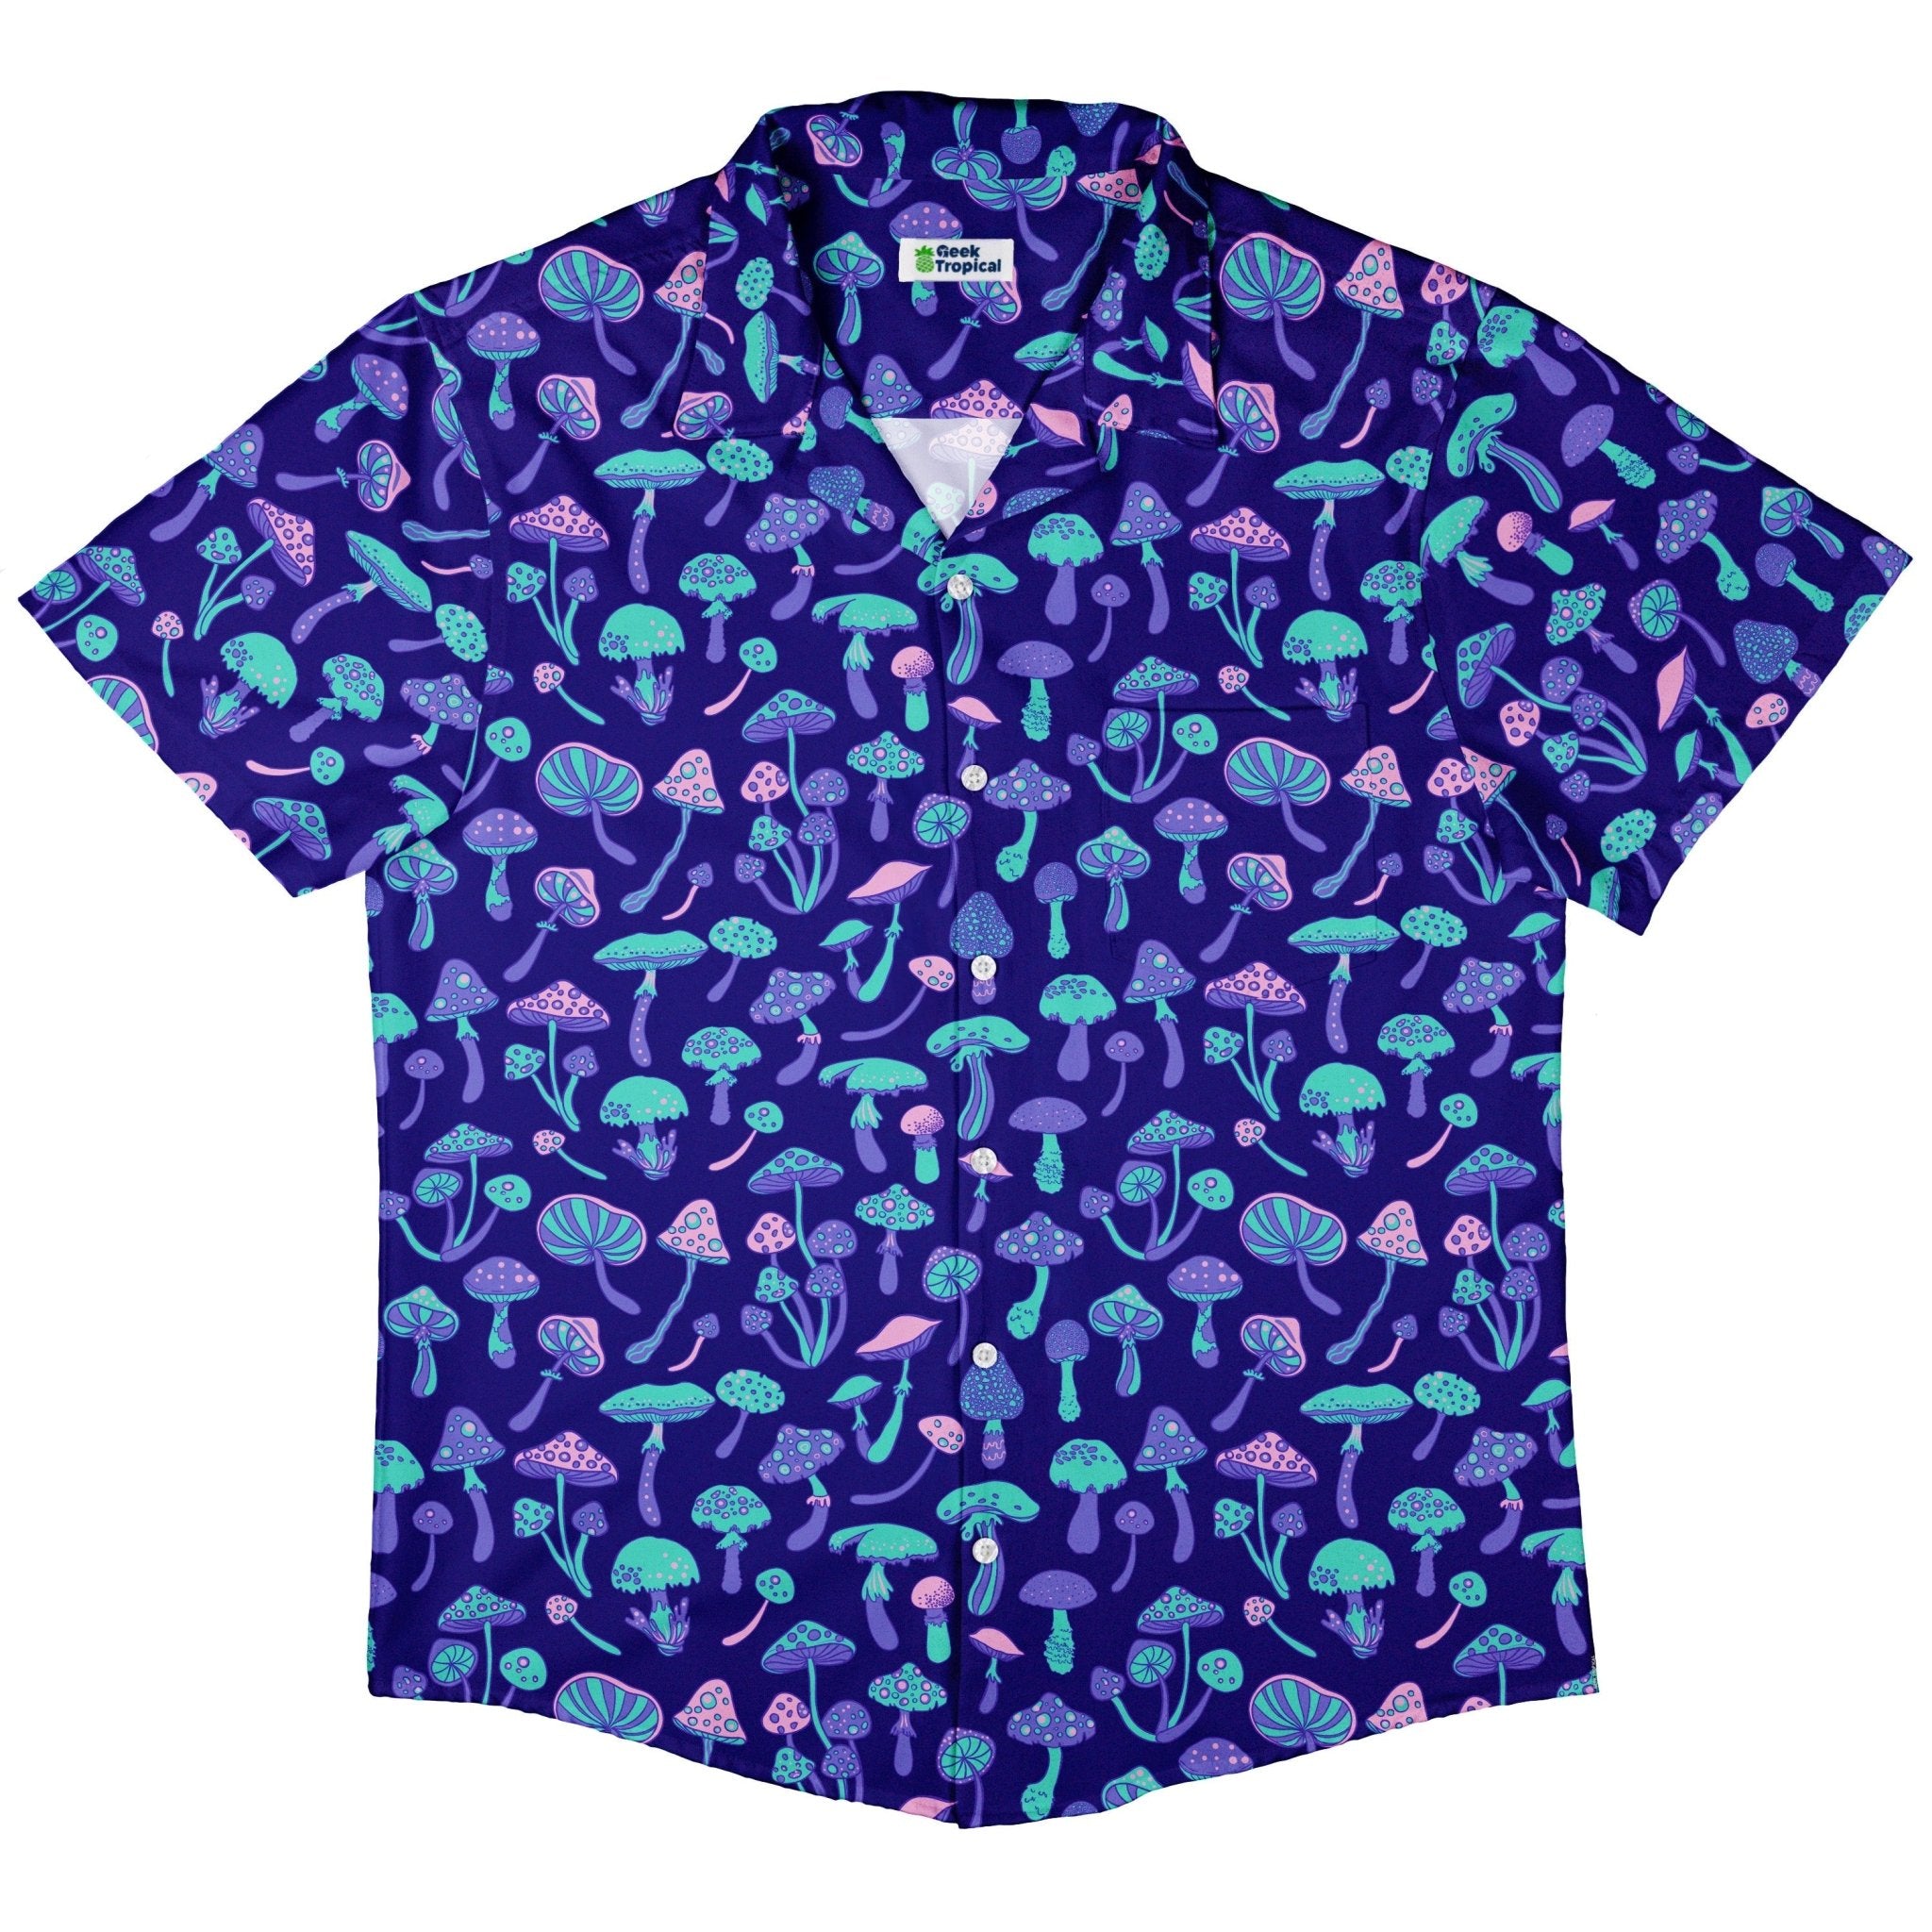 Psychedelic Mushrooms Button Up Shirt - adult sizing - Botany Print -